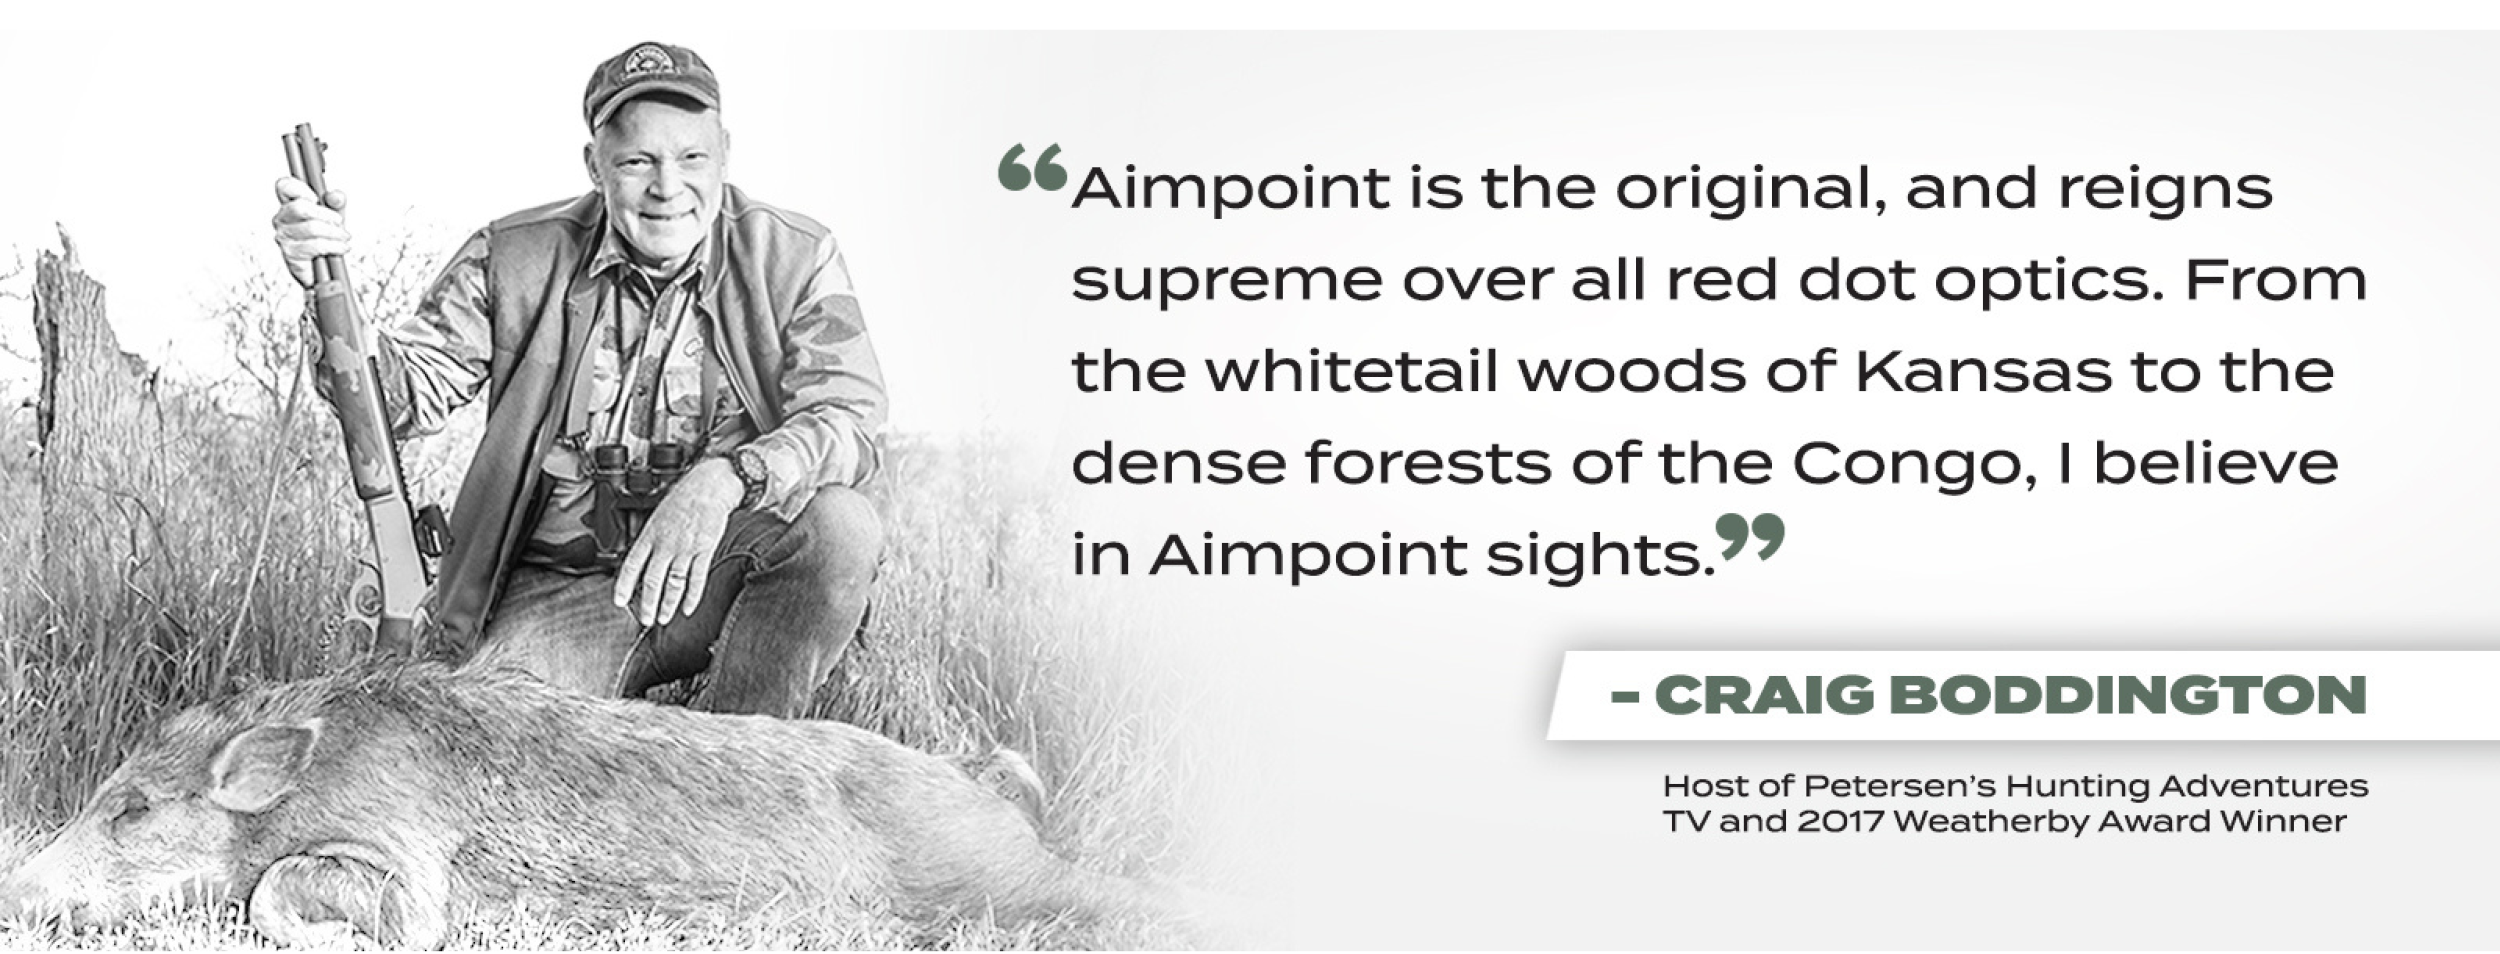 Aimpoint is the original red dot optic